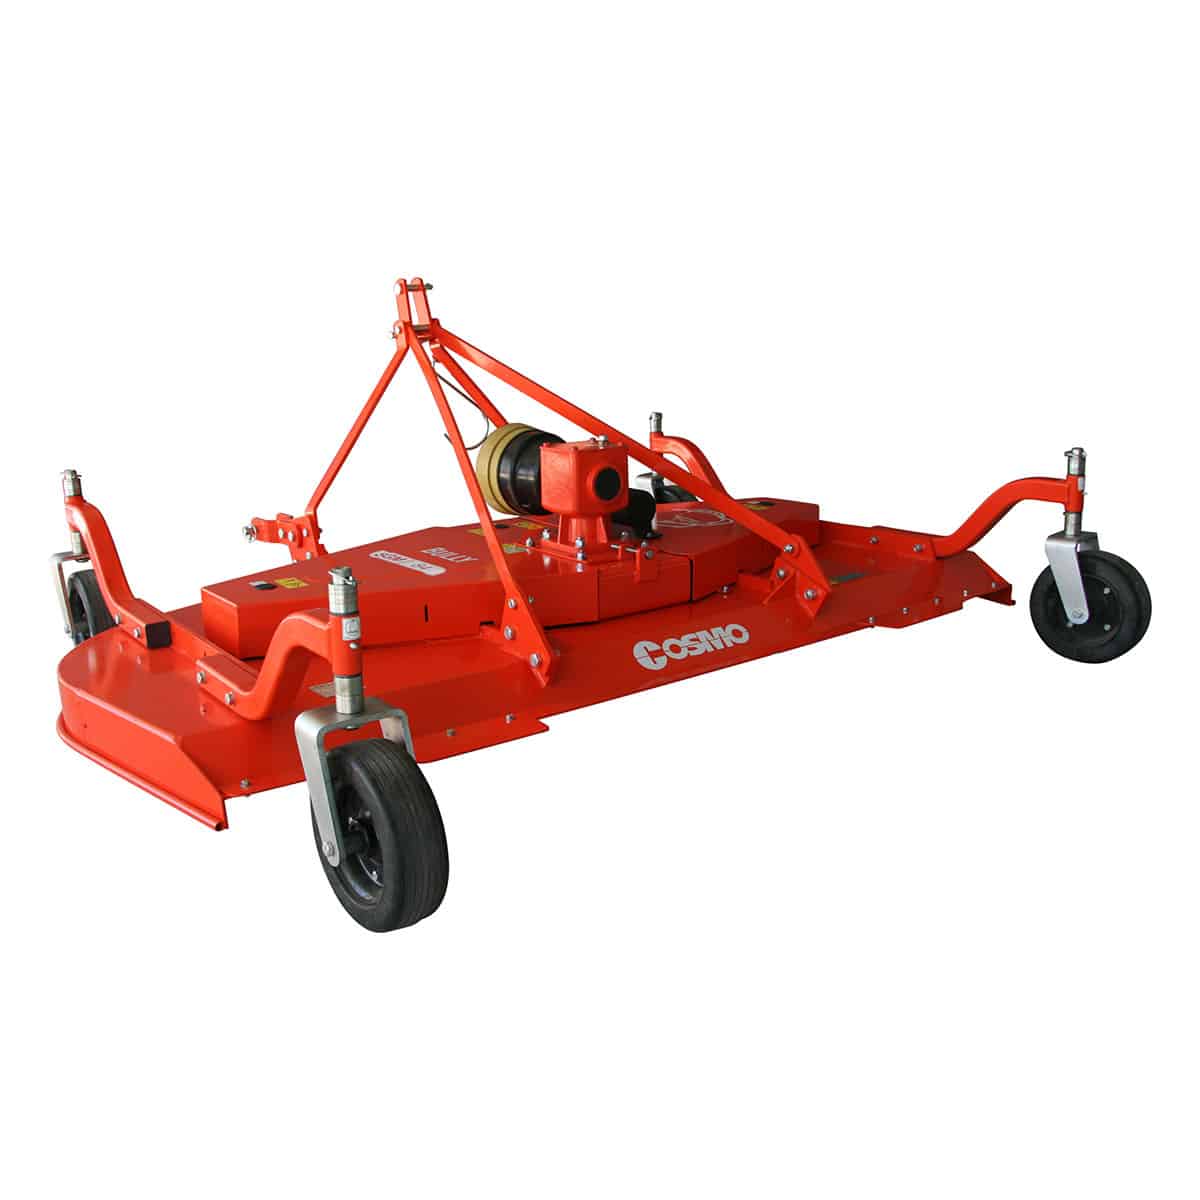 Images_1200-x-1200_COSMOBULLY_SGM-Finishing-Mower_rear